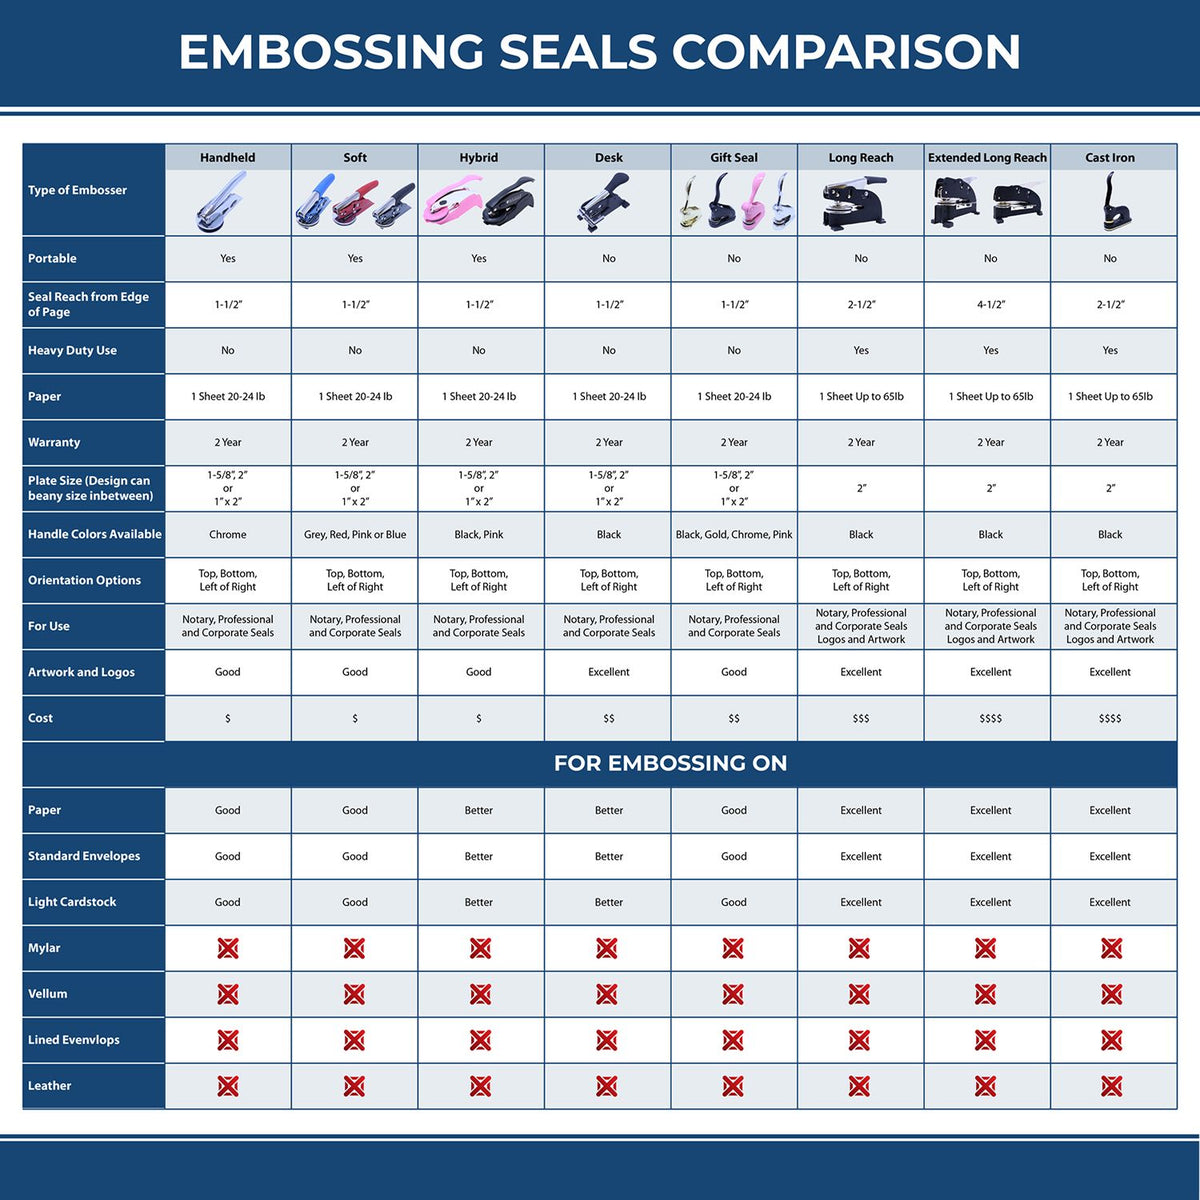 A comparison chart for the different types of mount models available for the Heavy Duty Cast Iron Michigan Engineer Seal Embosser.